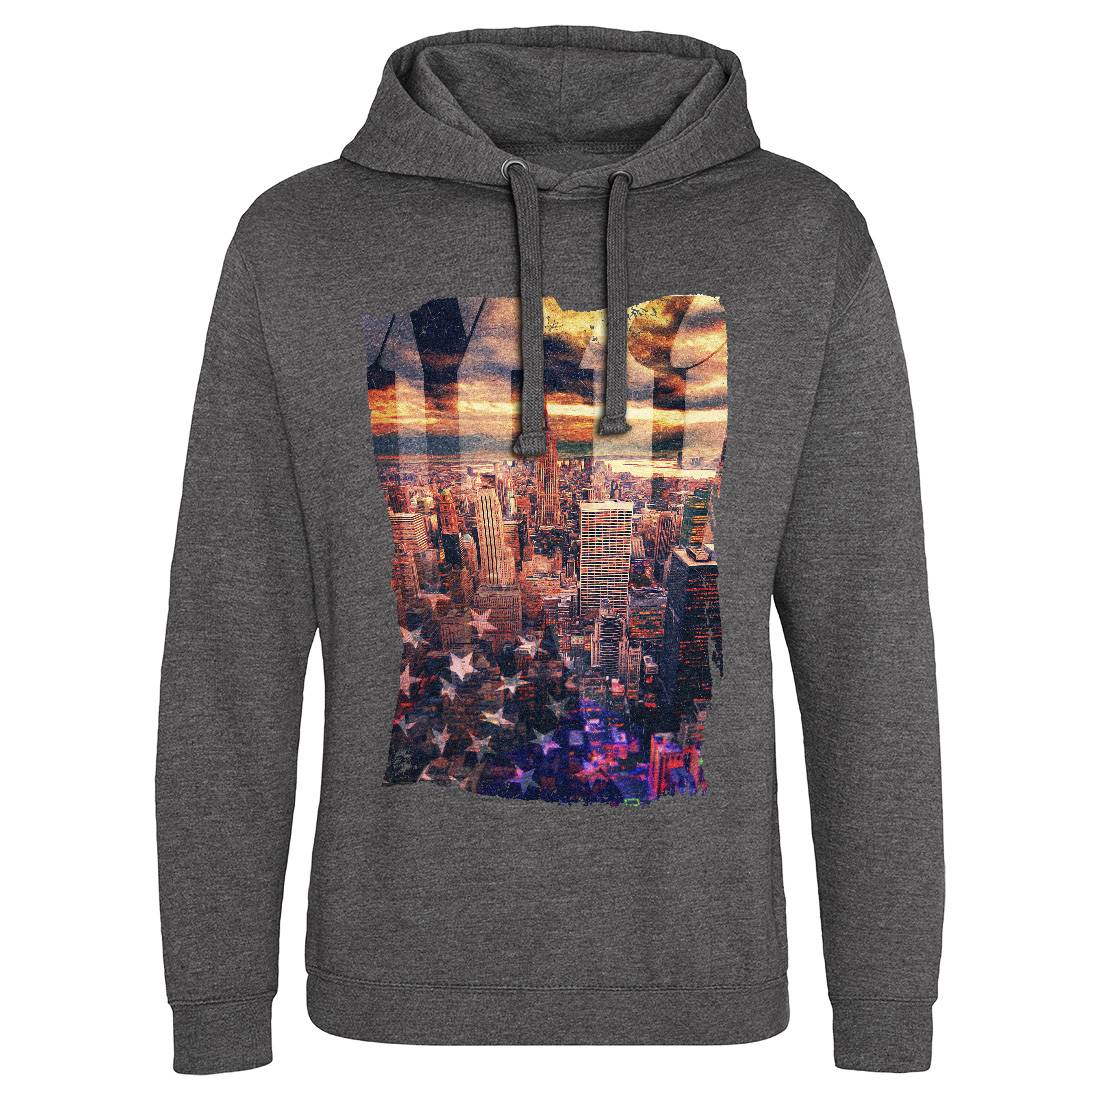 Dreaming Mens Hoodie Without Pocket Art A826